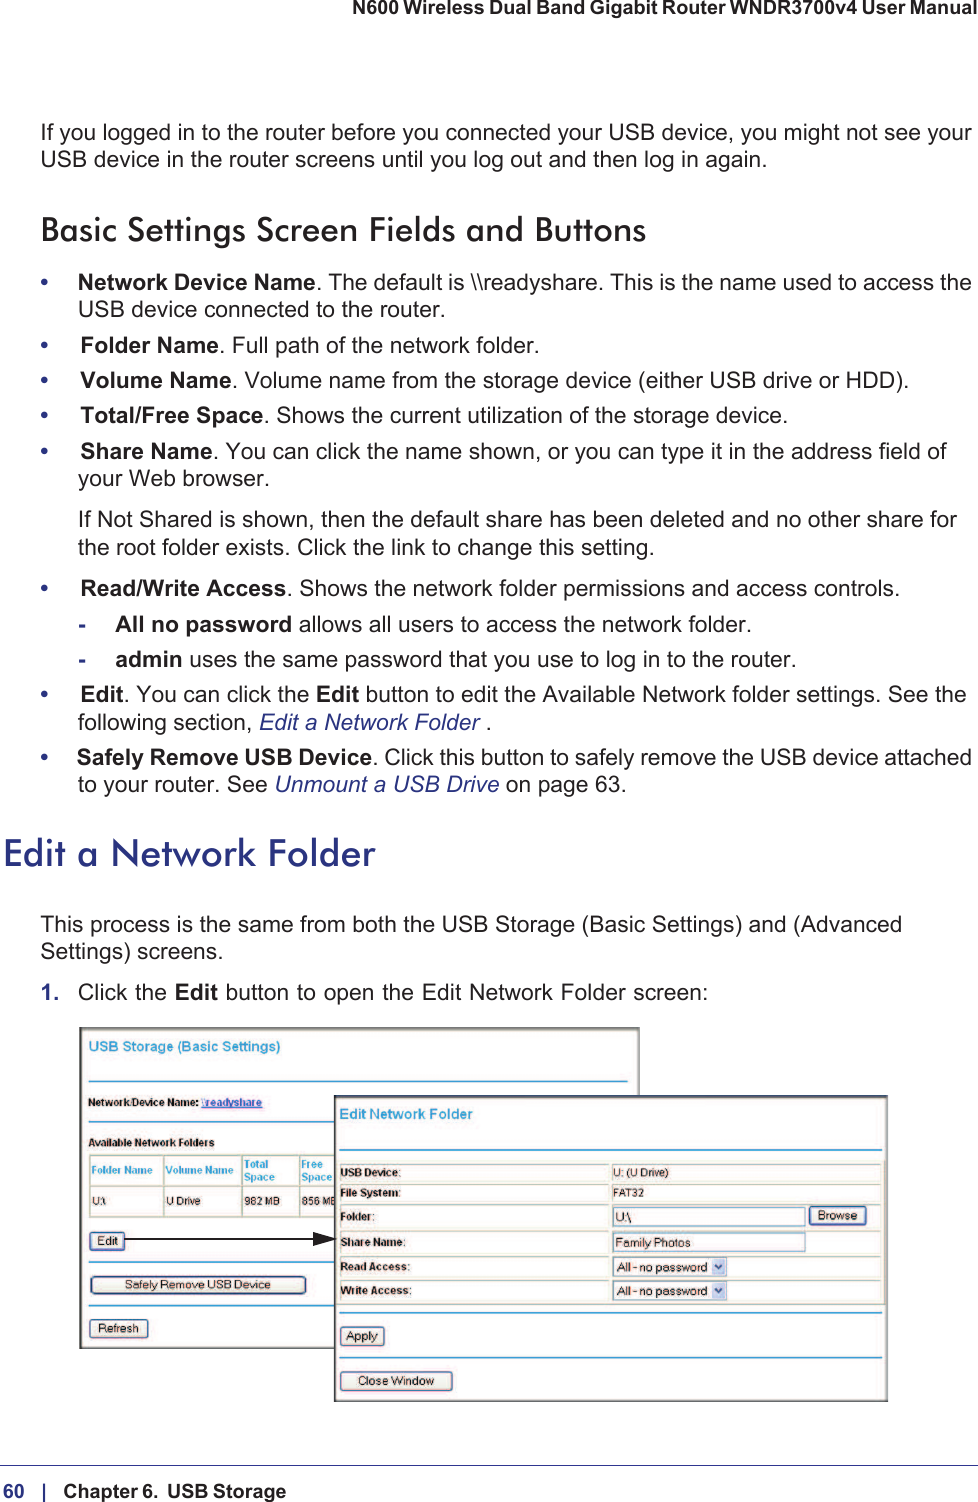 60 |    Chapter 6.  USB Storage N600 Wireless Dual Band Gigabit Router WNDR3700v4 User Manual If you logged in to the router before you connected your USB device, you might not see your USB device in the router screens until you log out and then log in again.Basic Settings Screen Fields and Buttons•Network Device Name. The default is \\readyshare. This is the name used to access the USB device connected to the router.•Folder Name. Full path of the network folder. •Volume Name. Volume name from the storage device (either USB drive or HDD). •Total/Free Space. Shows the current utilization of the storage device. •Share Name. You can click the name shown, or you can type it in the address field of your Web browser.If Not Shared is shown, then the default share has been deleted and no other share for the root folder exists. Click the link to change this setting.•Read/Write Access. Shows the network folder permissions and access controls.-All no password allows all users to access the network folder. -admin uses the same password that you use to log in to the router. •Edit. You can click the Edit button to edit the Available Network folder settings. See the following section, Edit a Network Folder .•Safely Remove USB Device. Click this button to safely remove the USB device attached to your router. See Unmount a USB Drive on page  63.Edit a Network FolderThis process is the same from both the USB Storage (Basic Settings) and (Advanced Settings) screens. 1. Click the Edit button to open the Edit Network Folder screen: